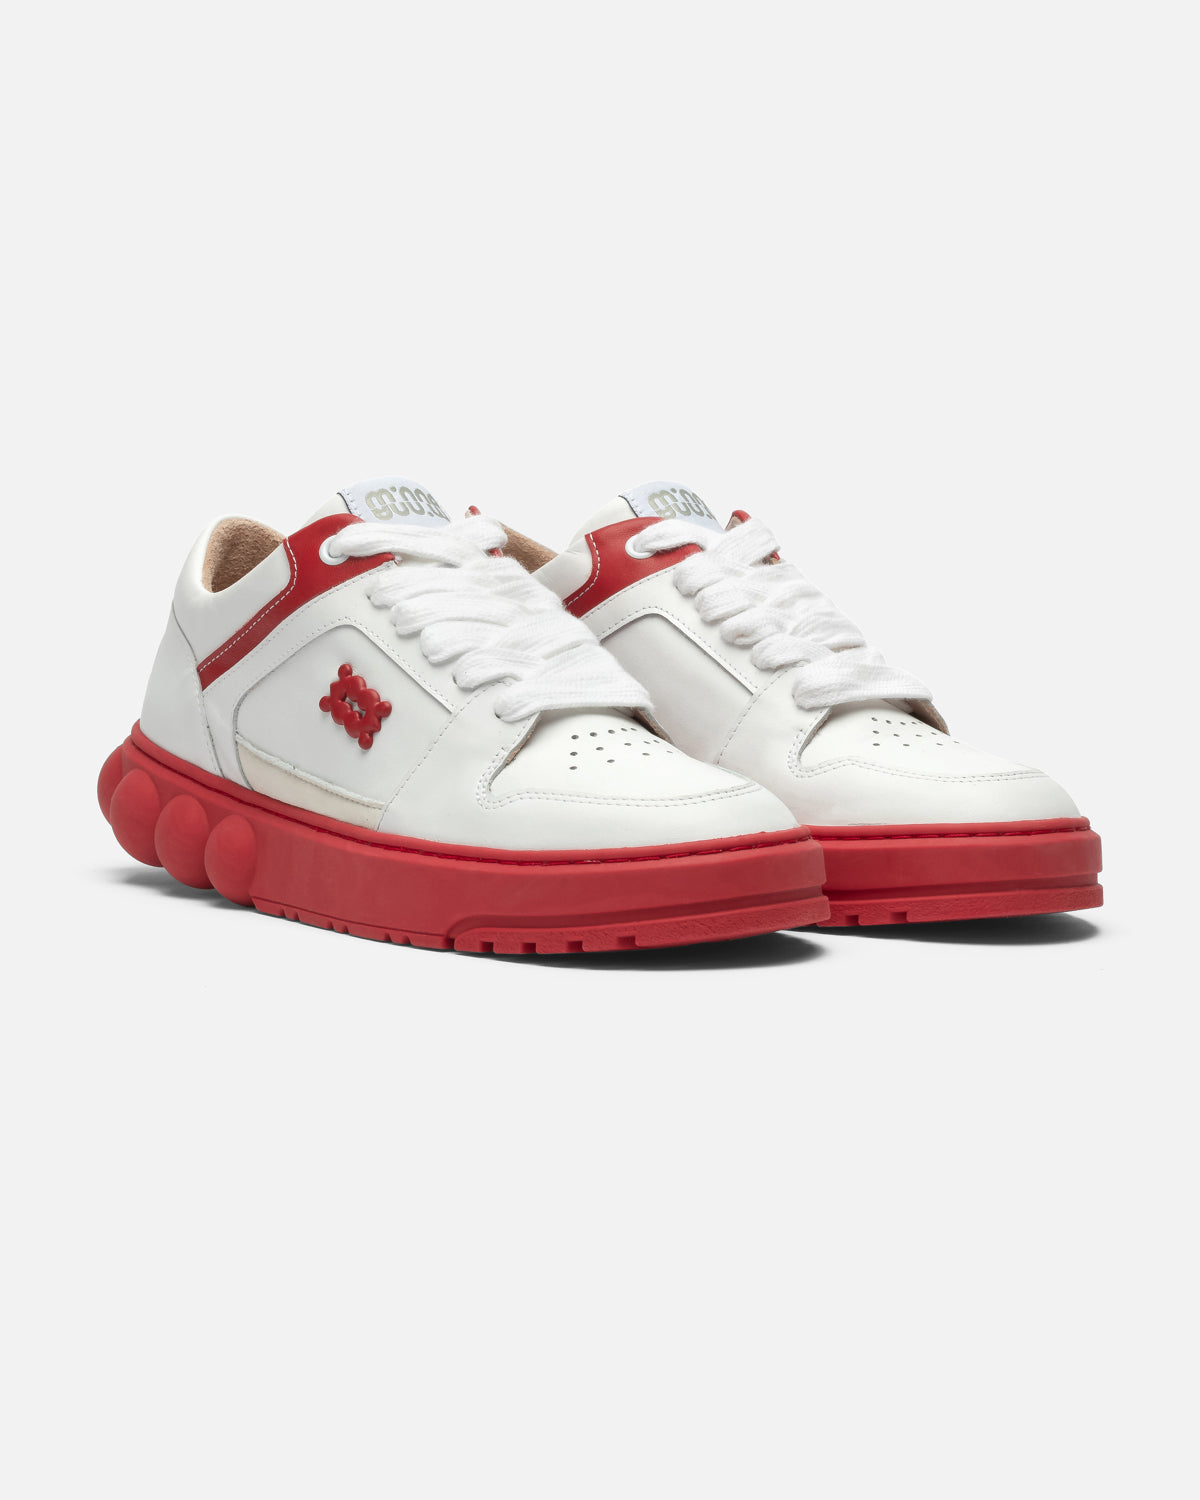 Oyster Red/White Leather